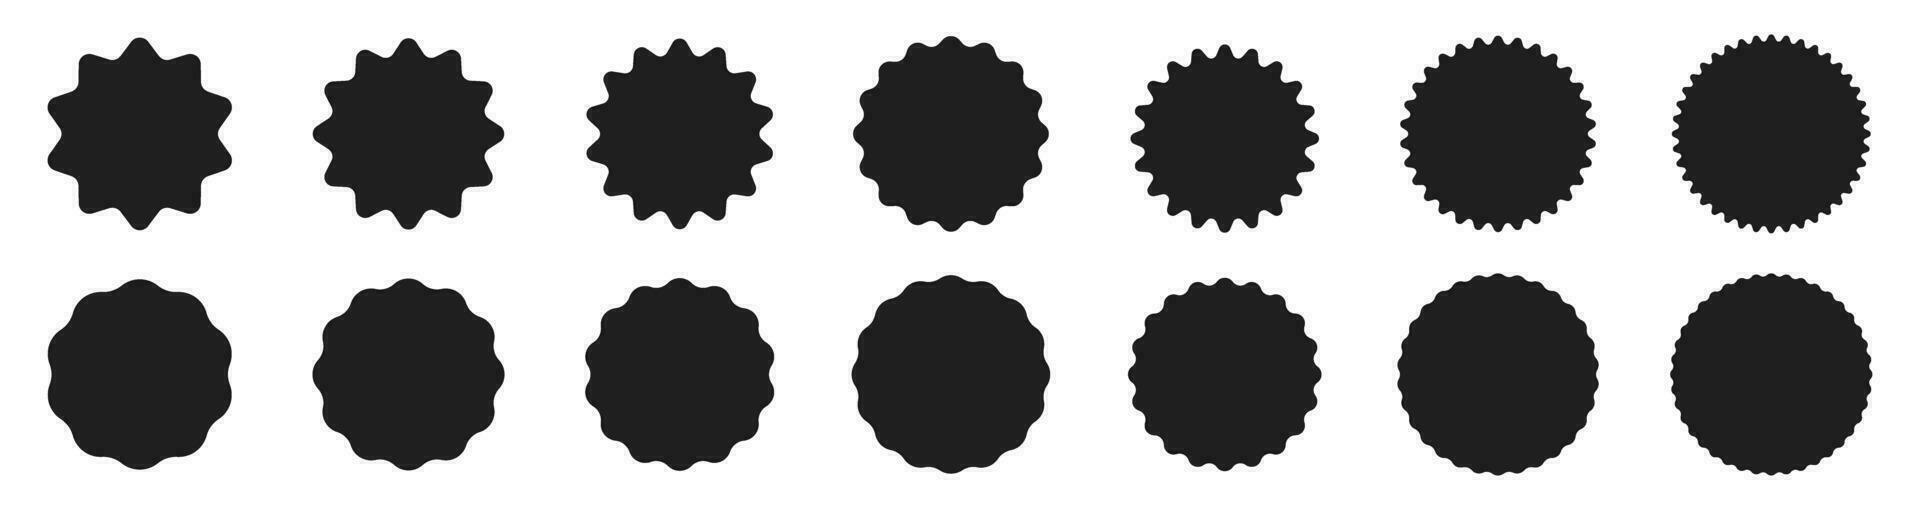 Set of black price starburst speech bubbles sticker for sale or discount vector